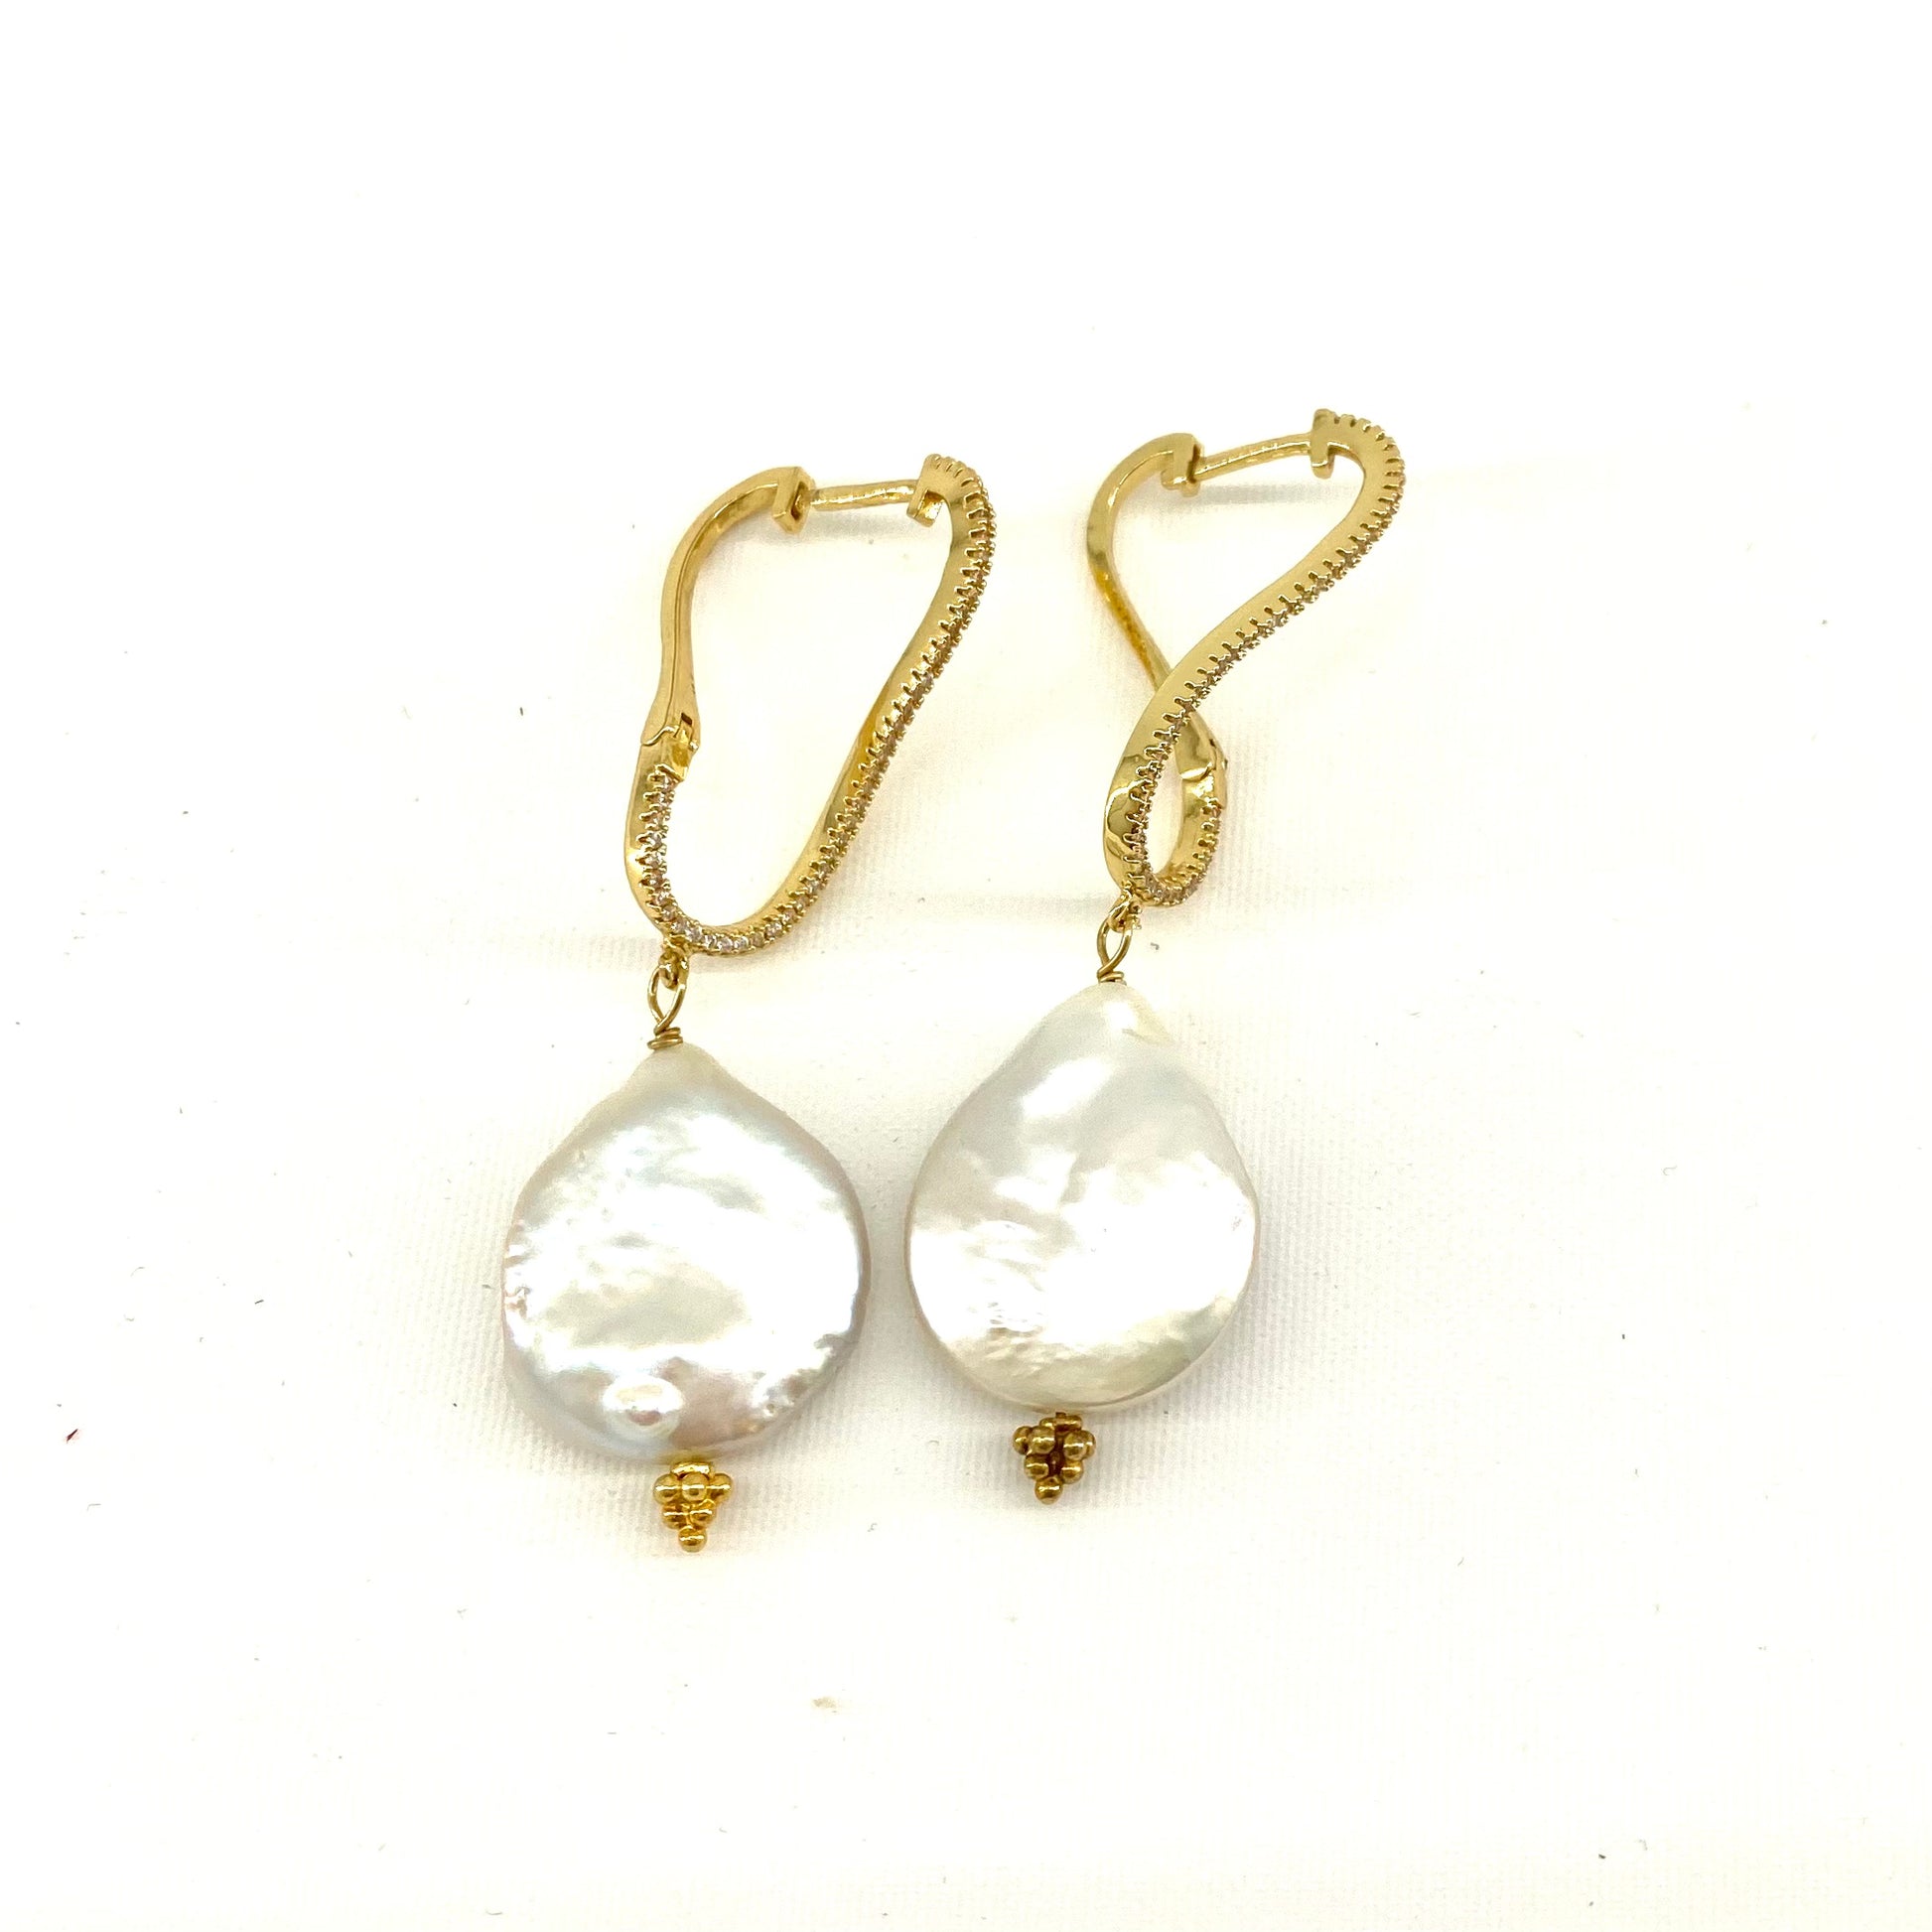 Twisted hoop gold earrings with large coin freshwater pearl